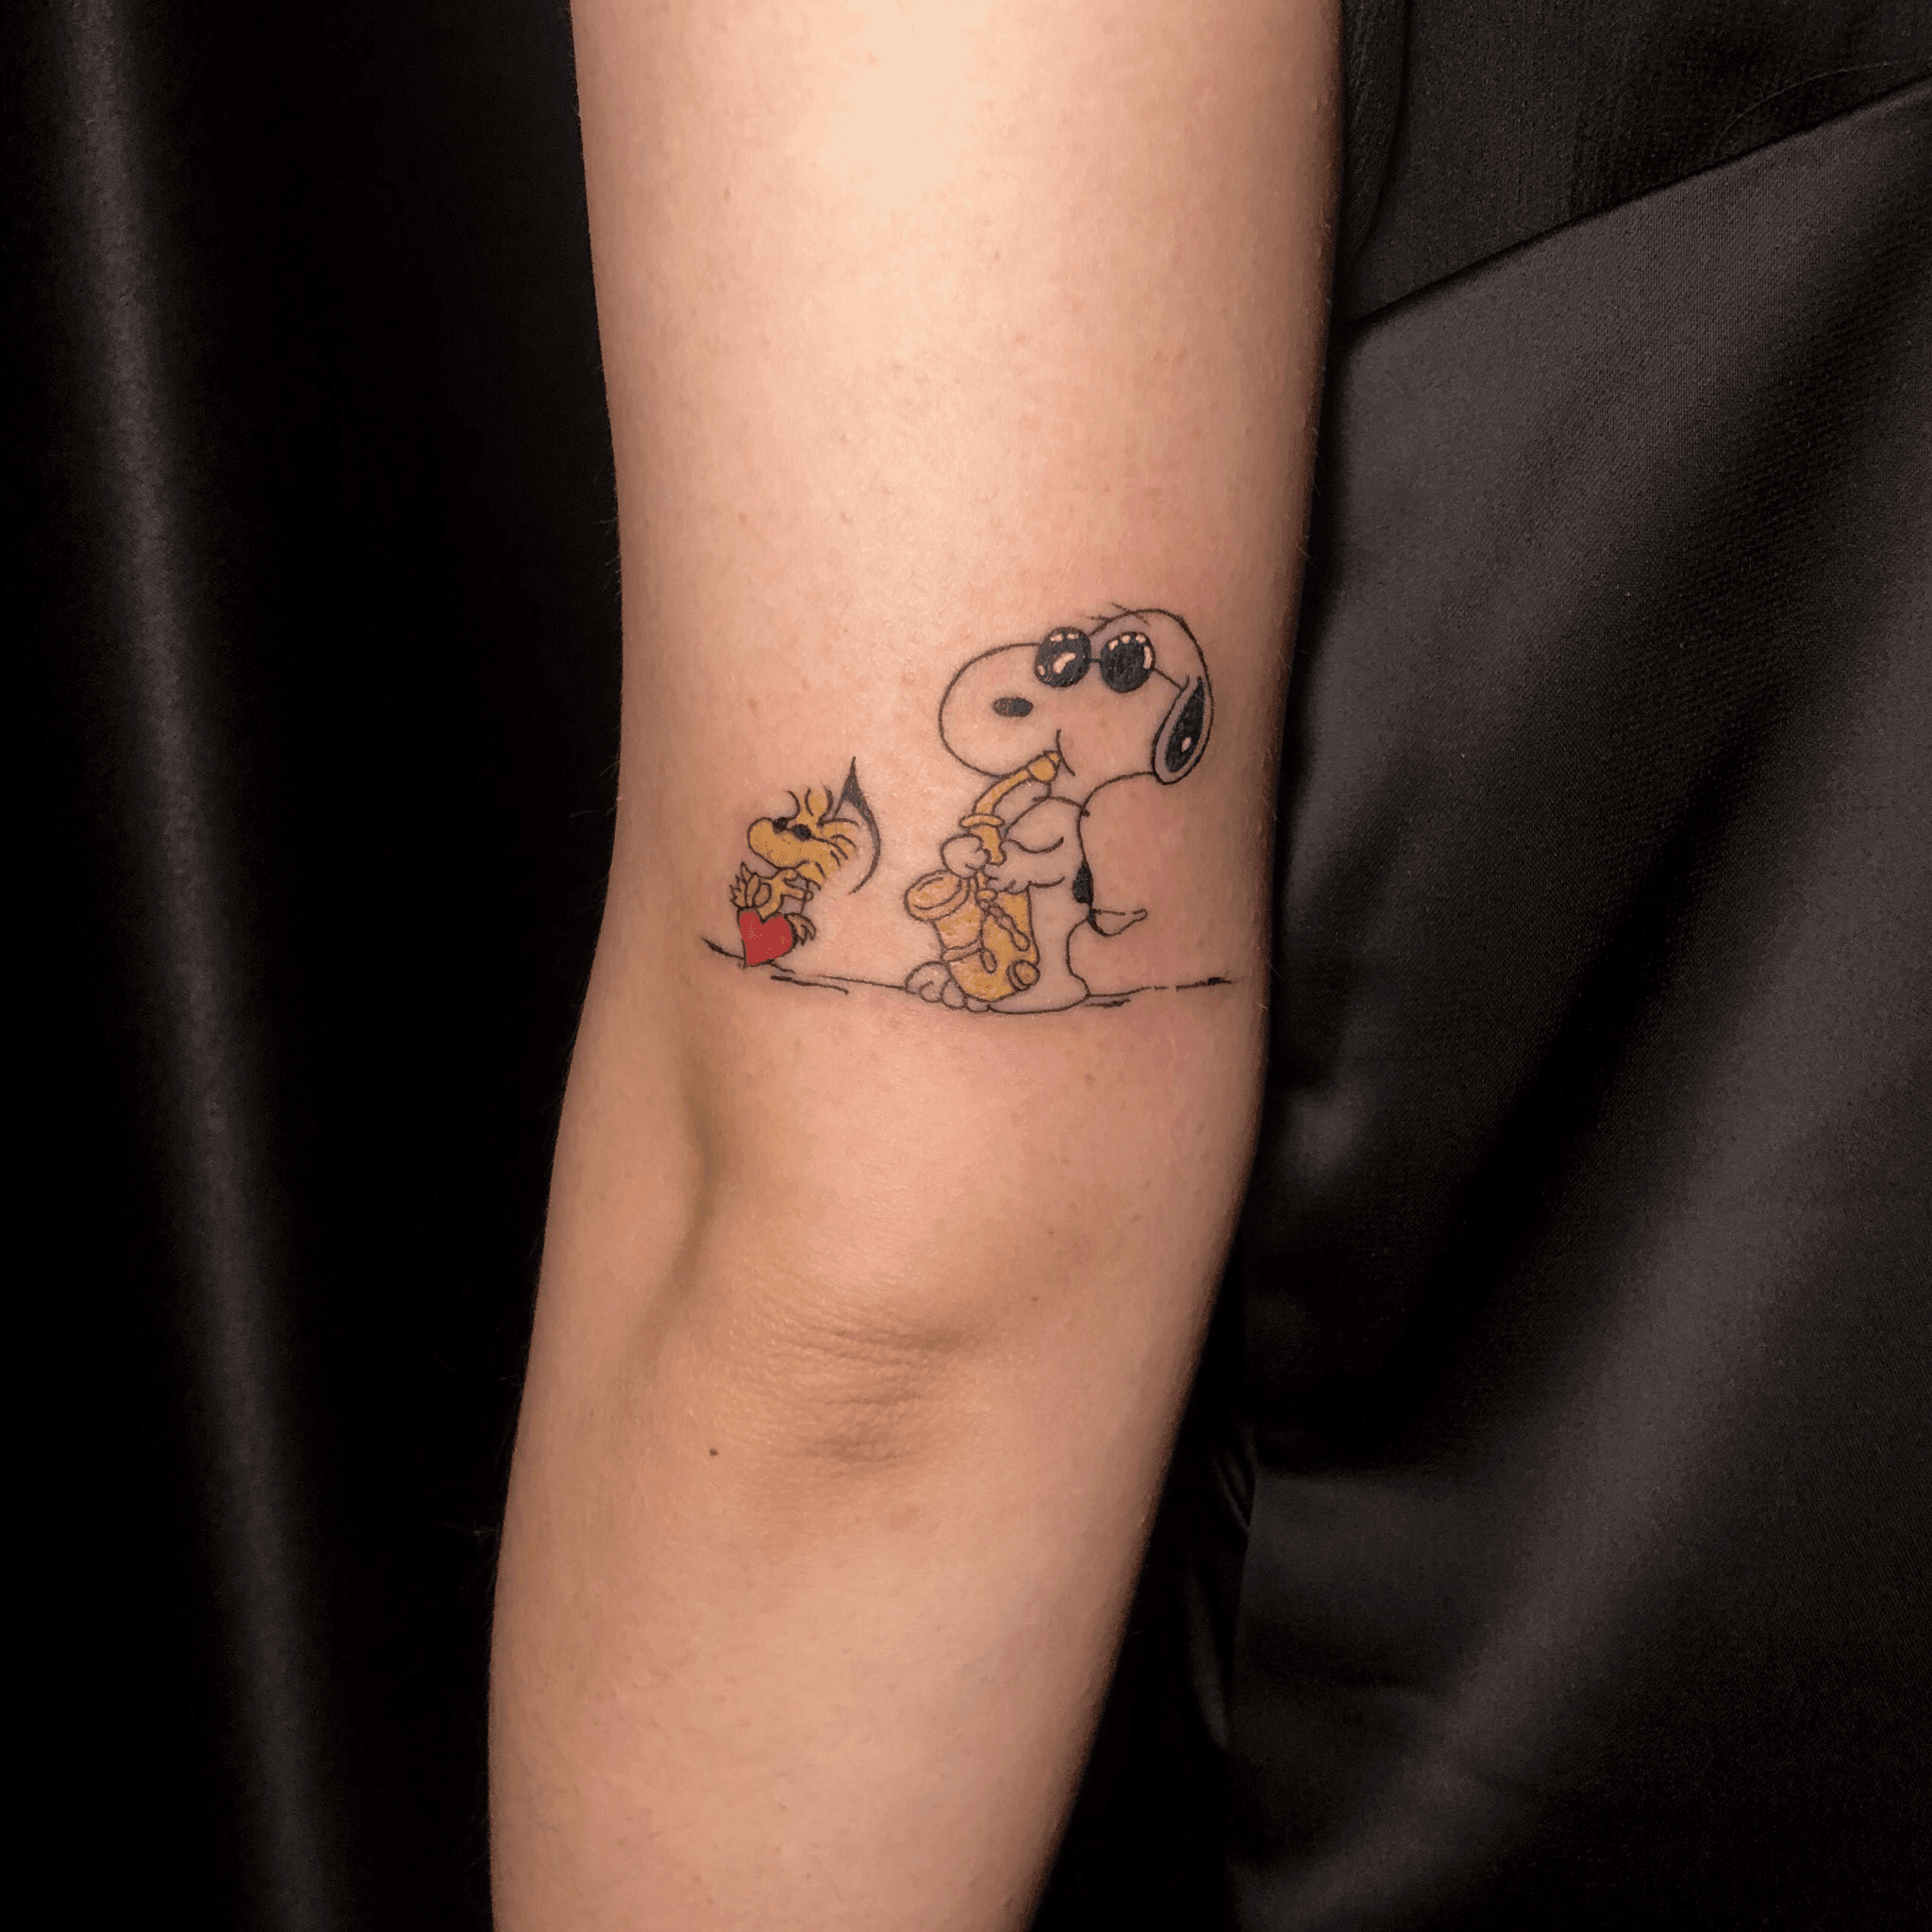 Snoopy and Woodstock tattoo located on the hip